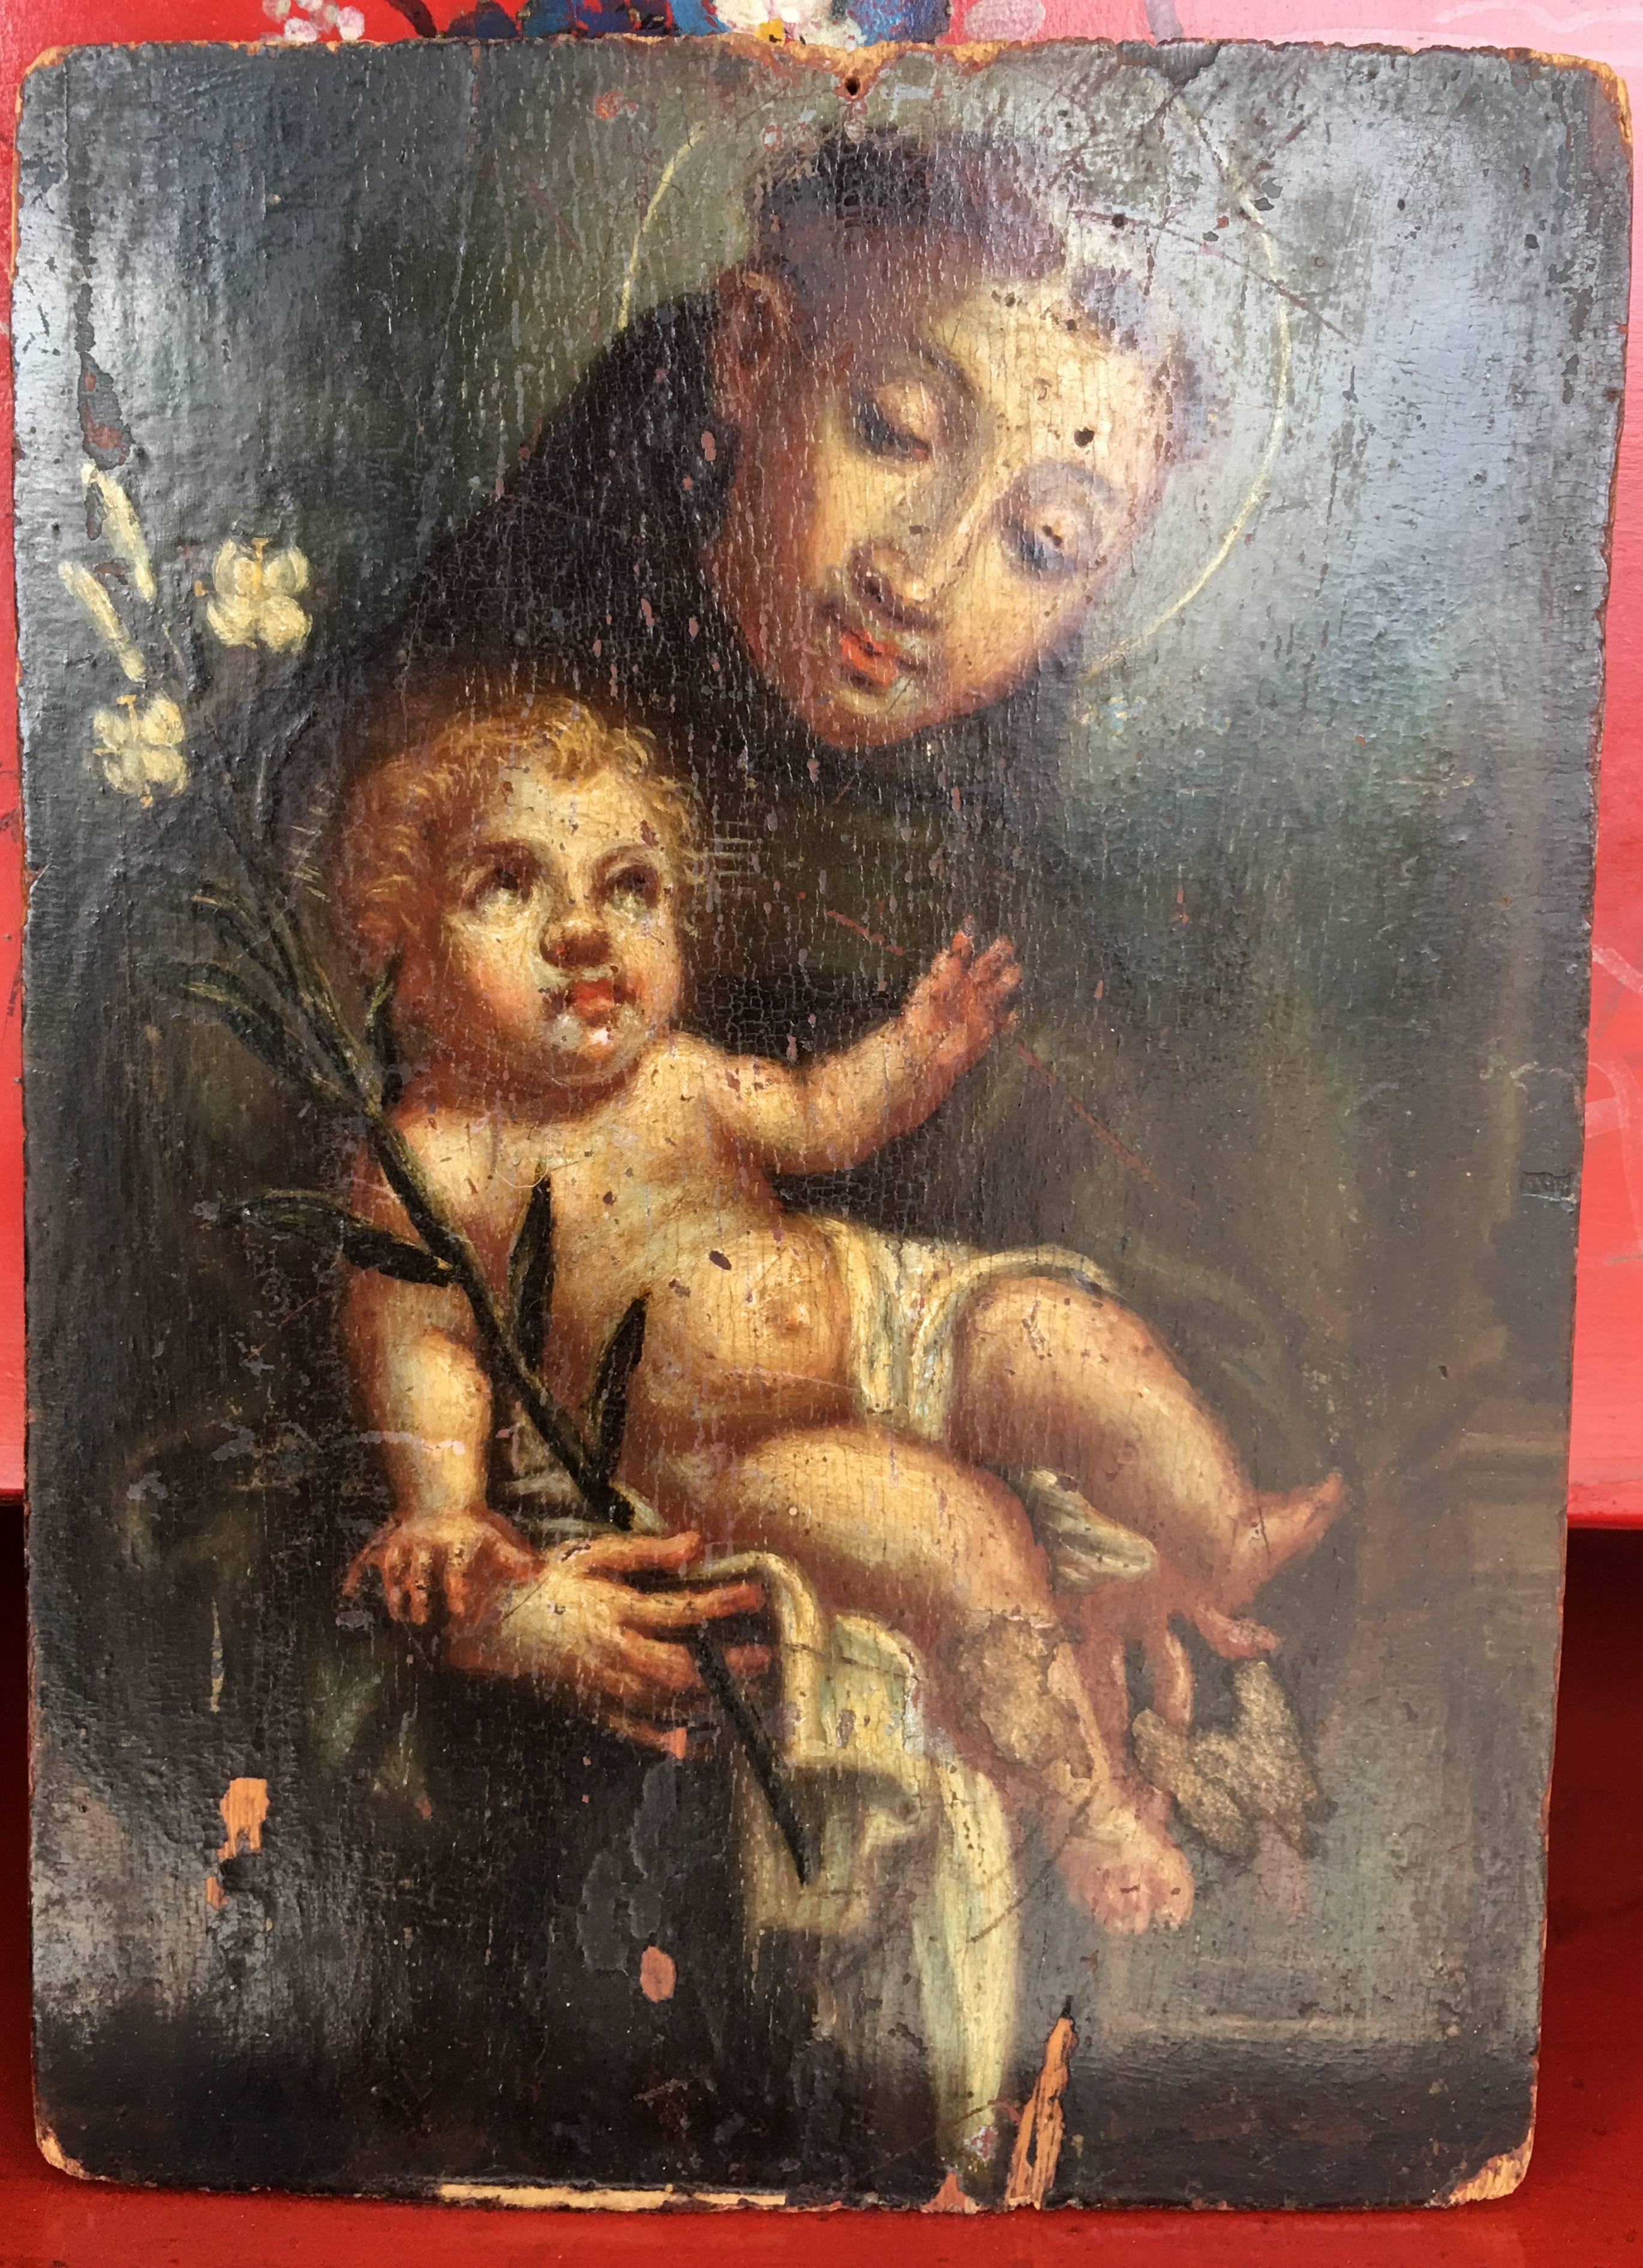 Original oil on panel of Saint offering the Child, by an unidentified artist.

--This painting represents St. Anthony of Padua.  The scene is one that is often chosen to represent him: his fellow Franciscans looked out the window one day and saw a